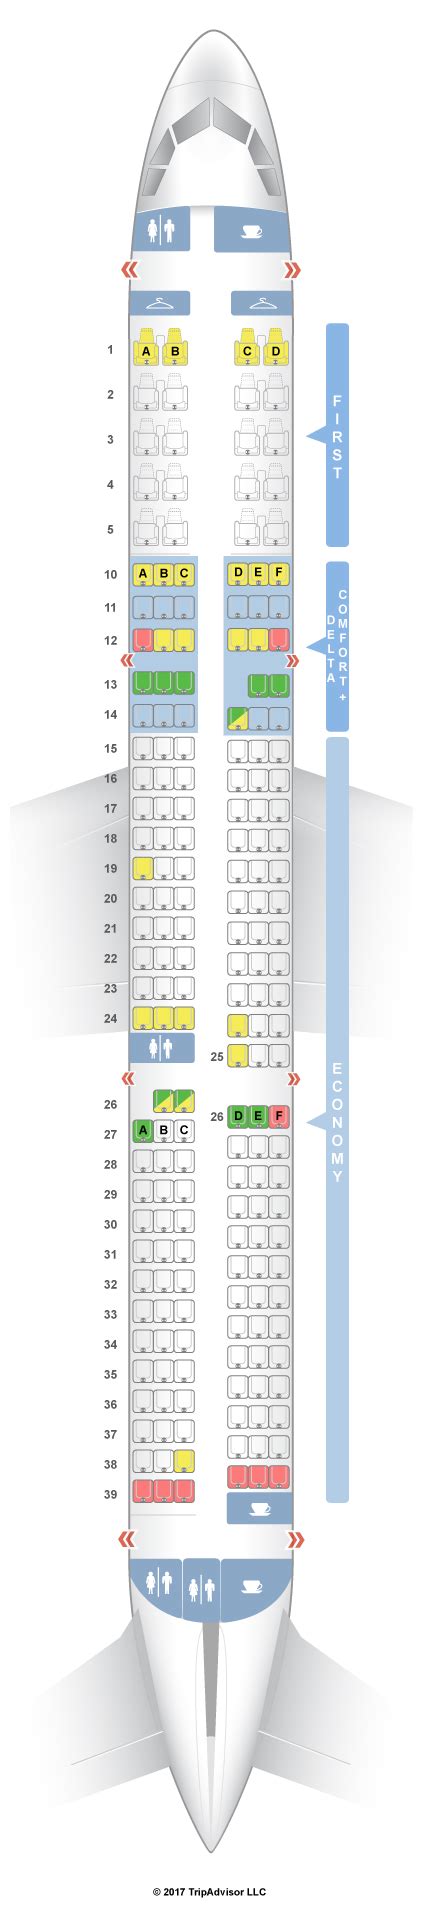 Delta Airbus A330 300 Seat Map